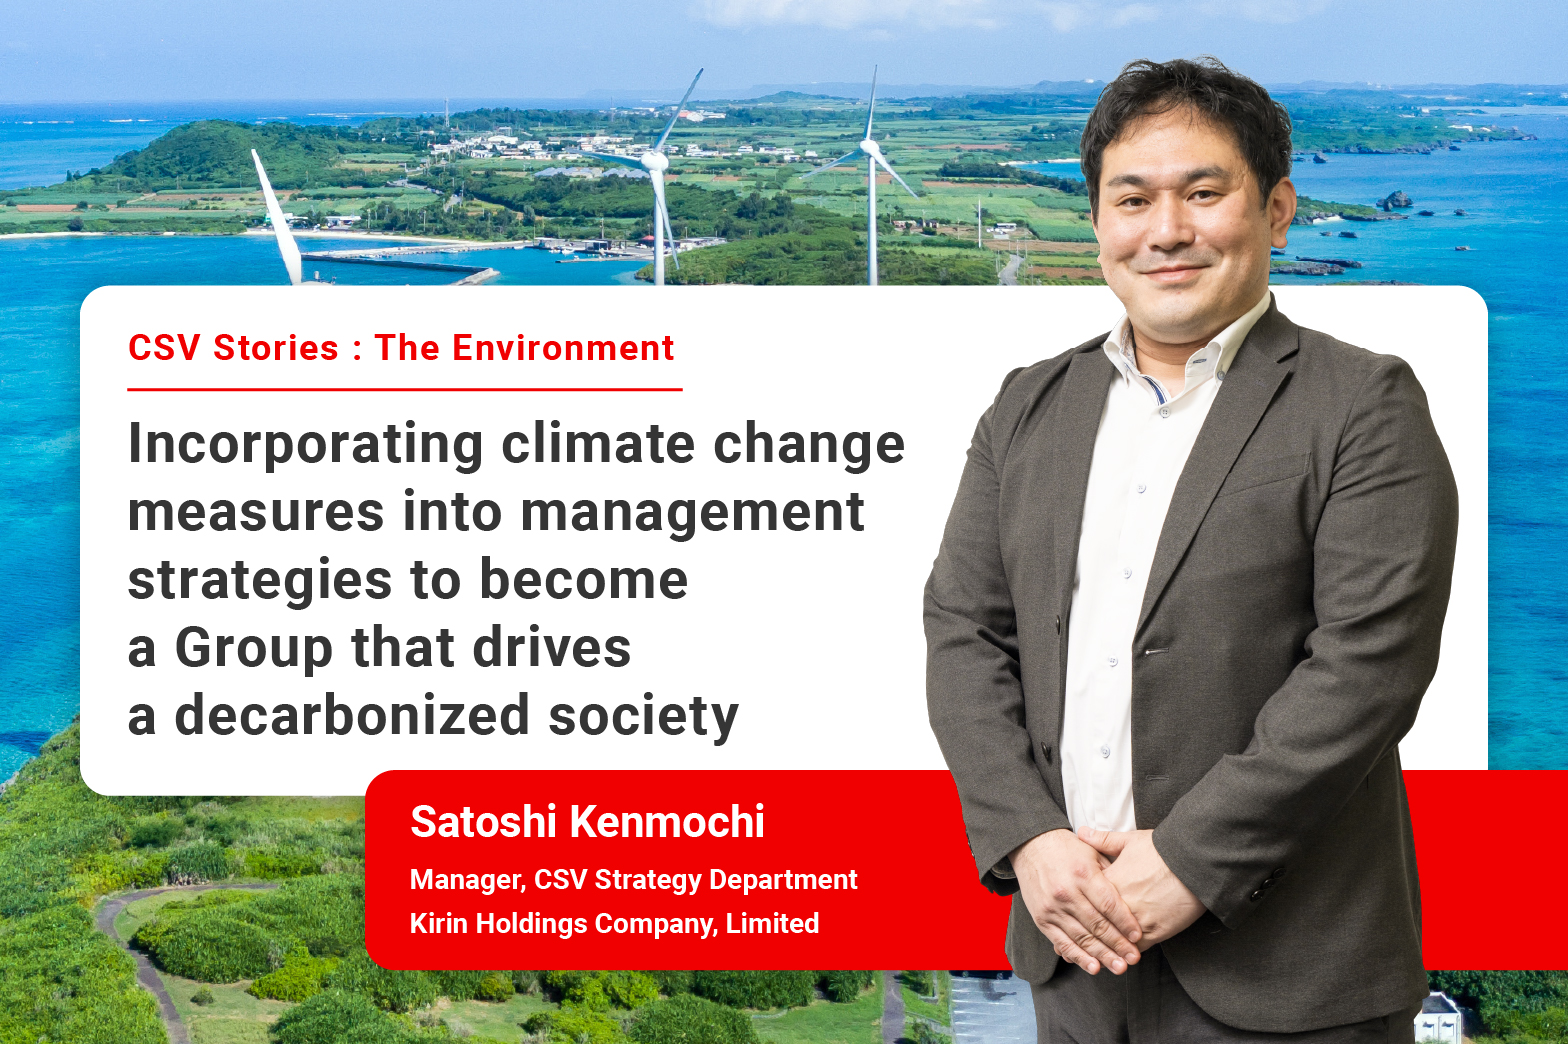 Incorporating climate change measures into management strategies to become a Group that drives a decarbonized society